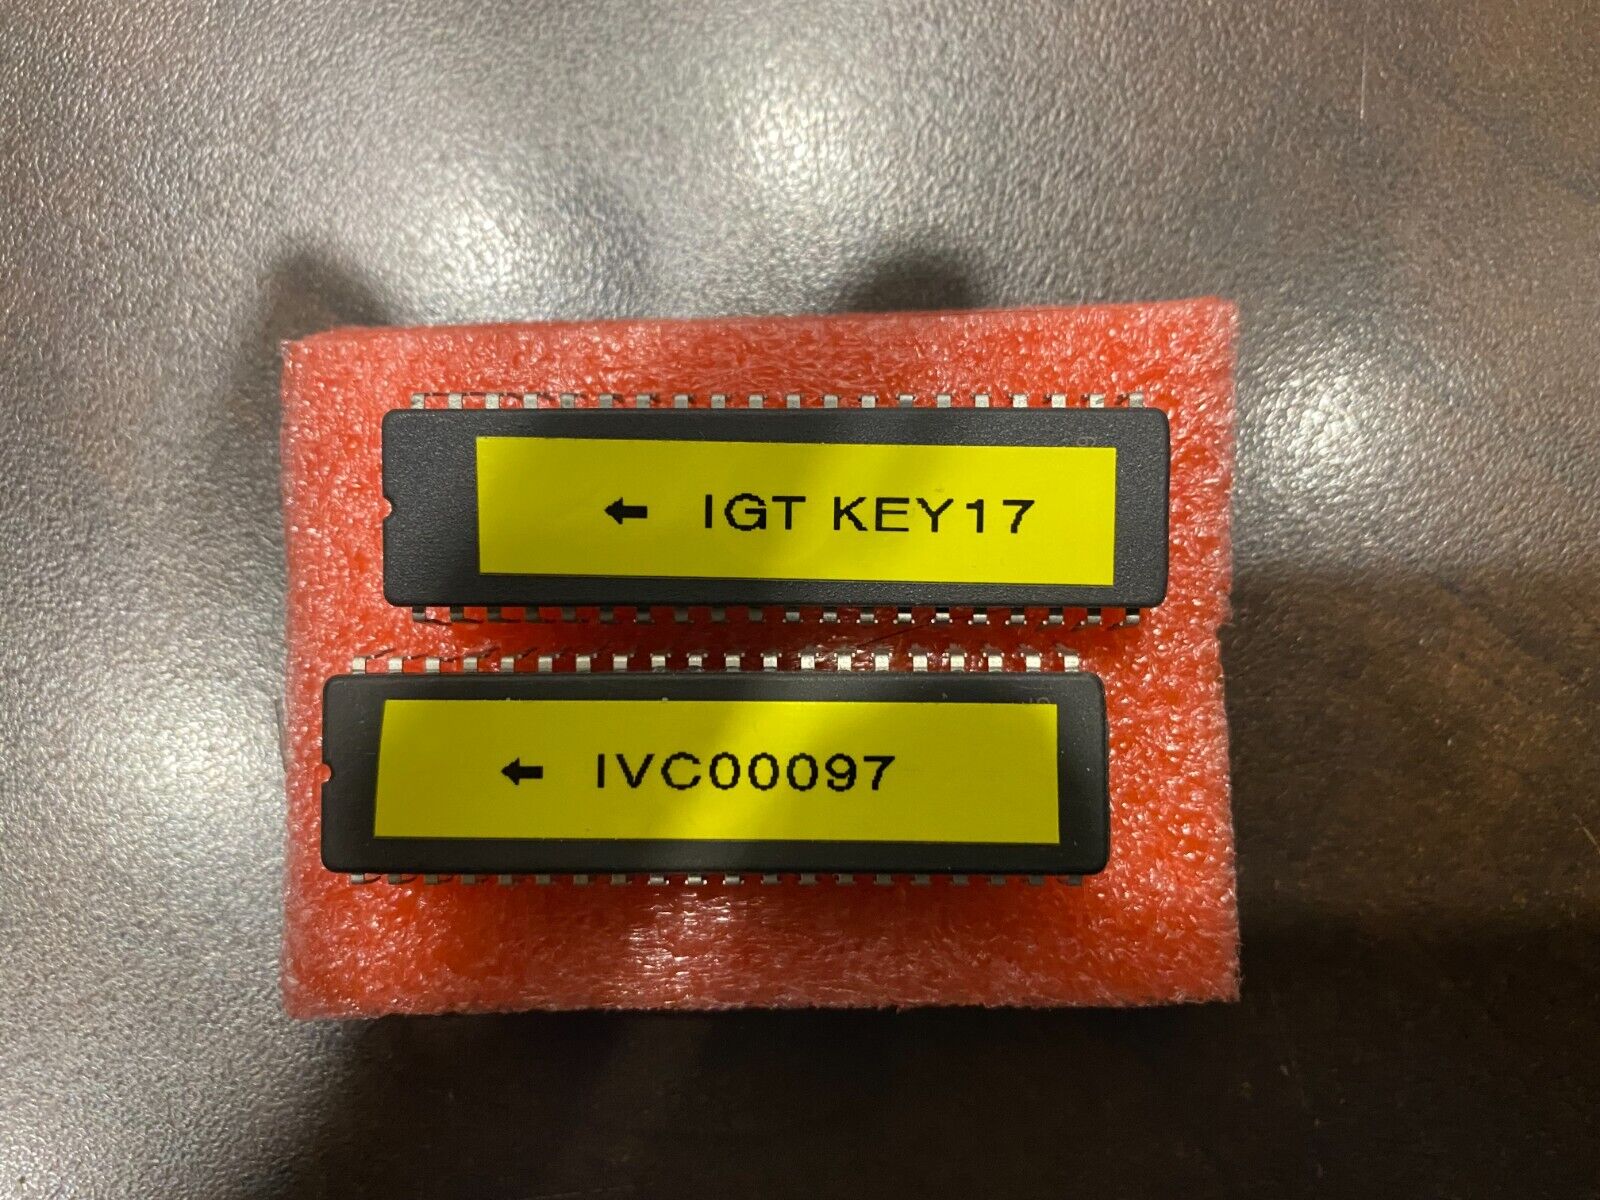 IGT S2000 CLEAR CHIP SET